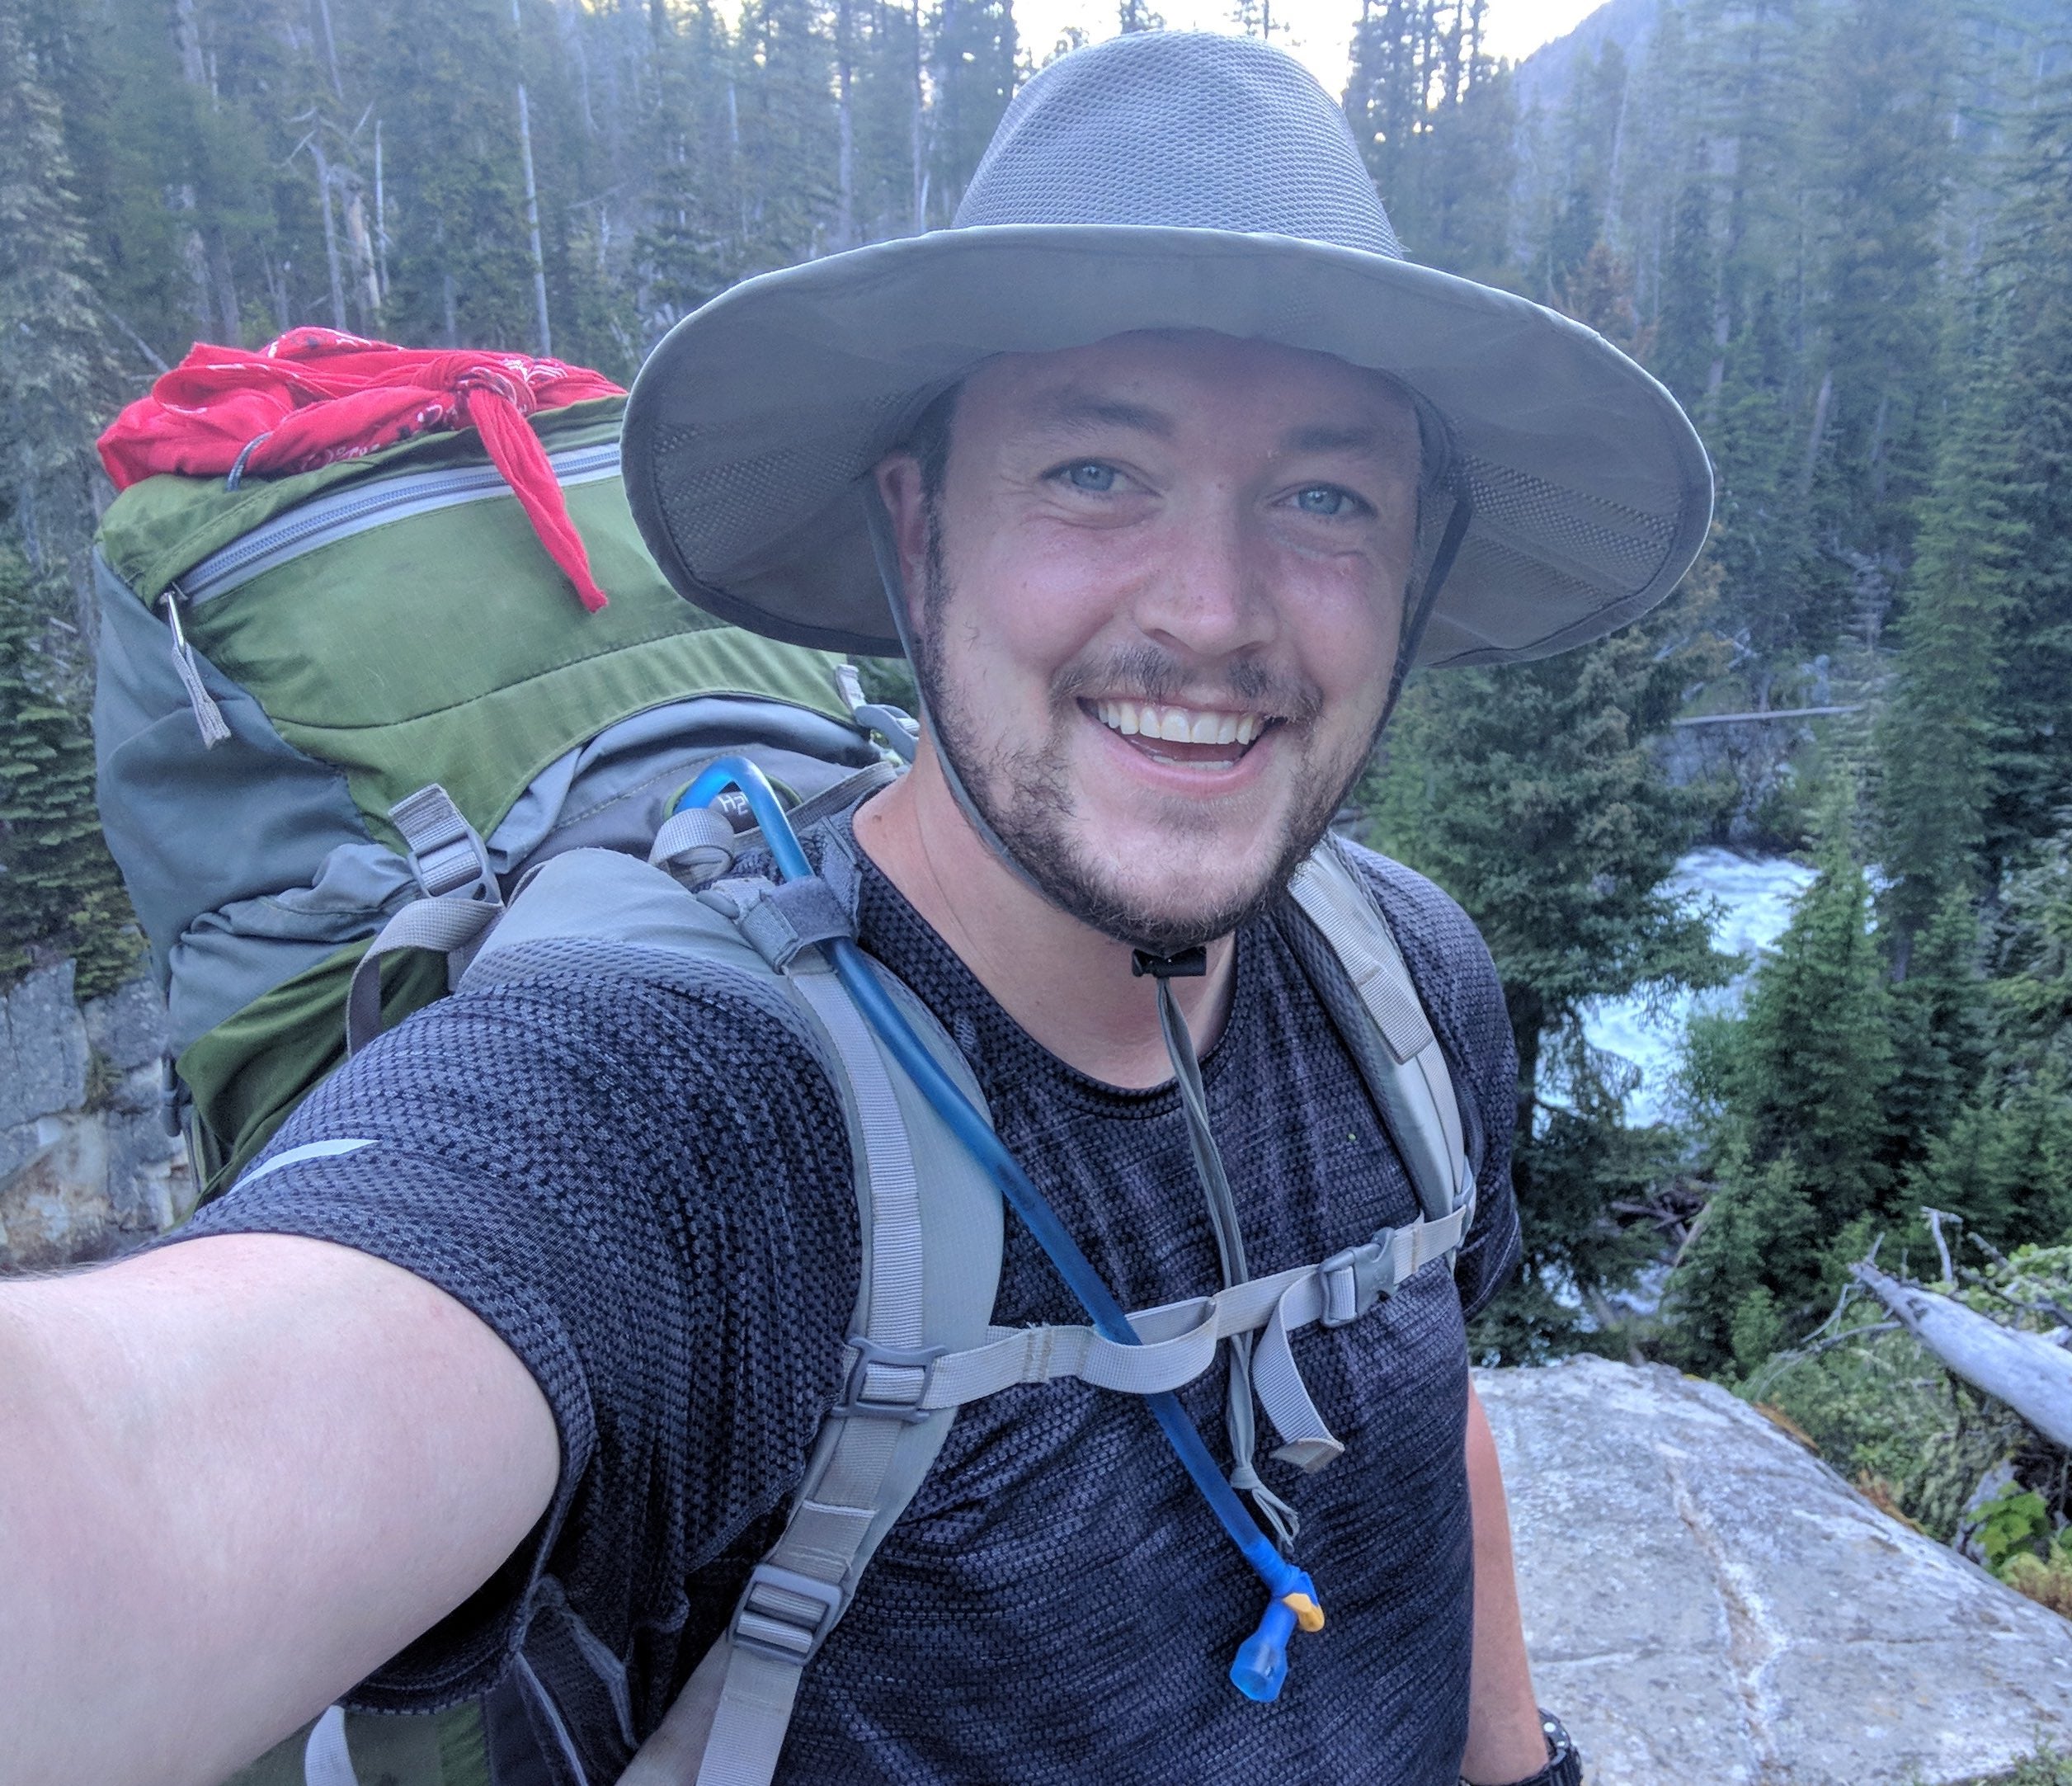 man in woods wearing hiking gear and hat